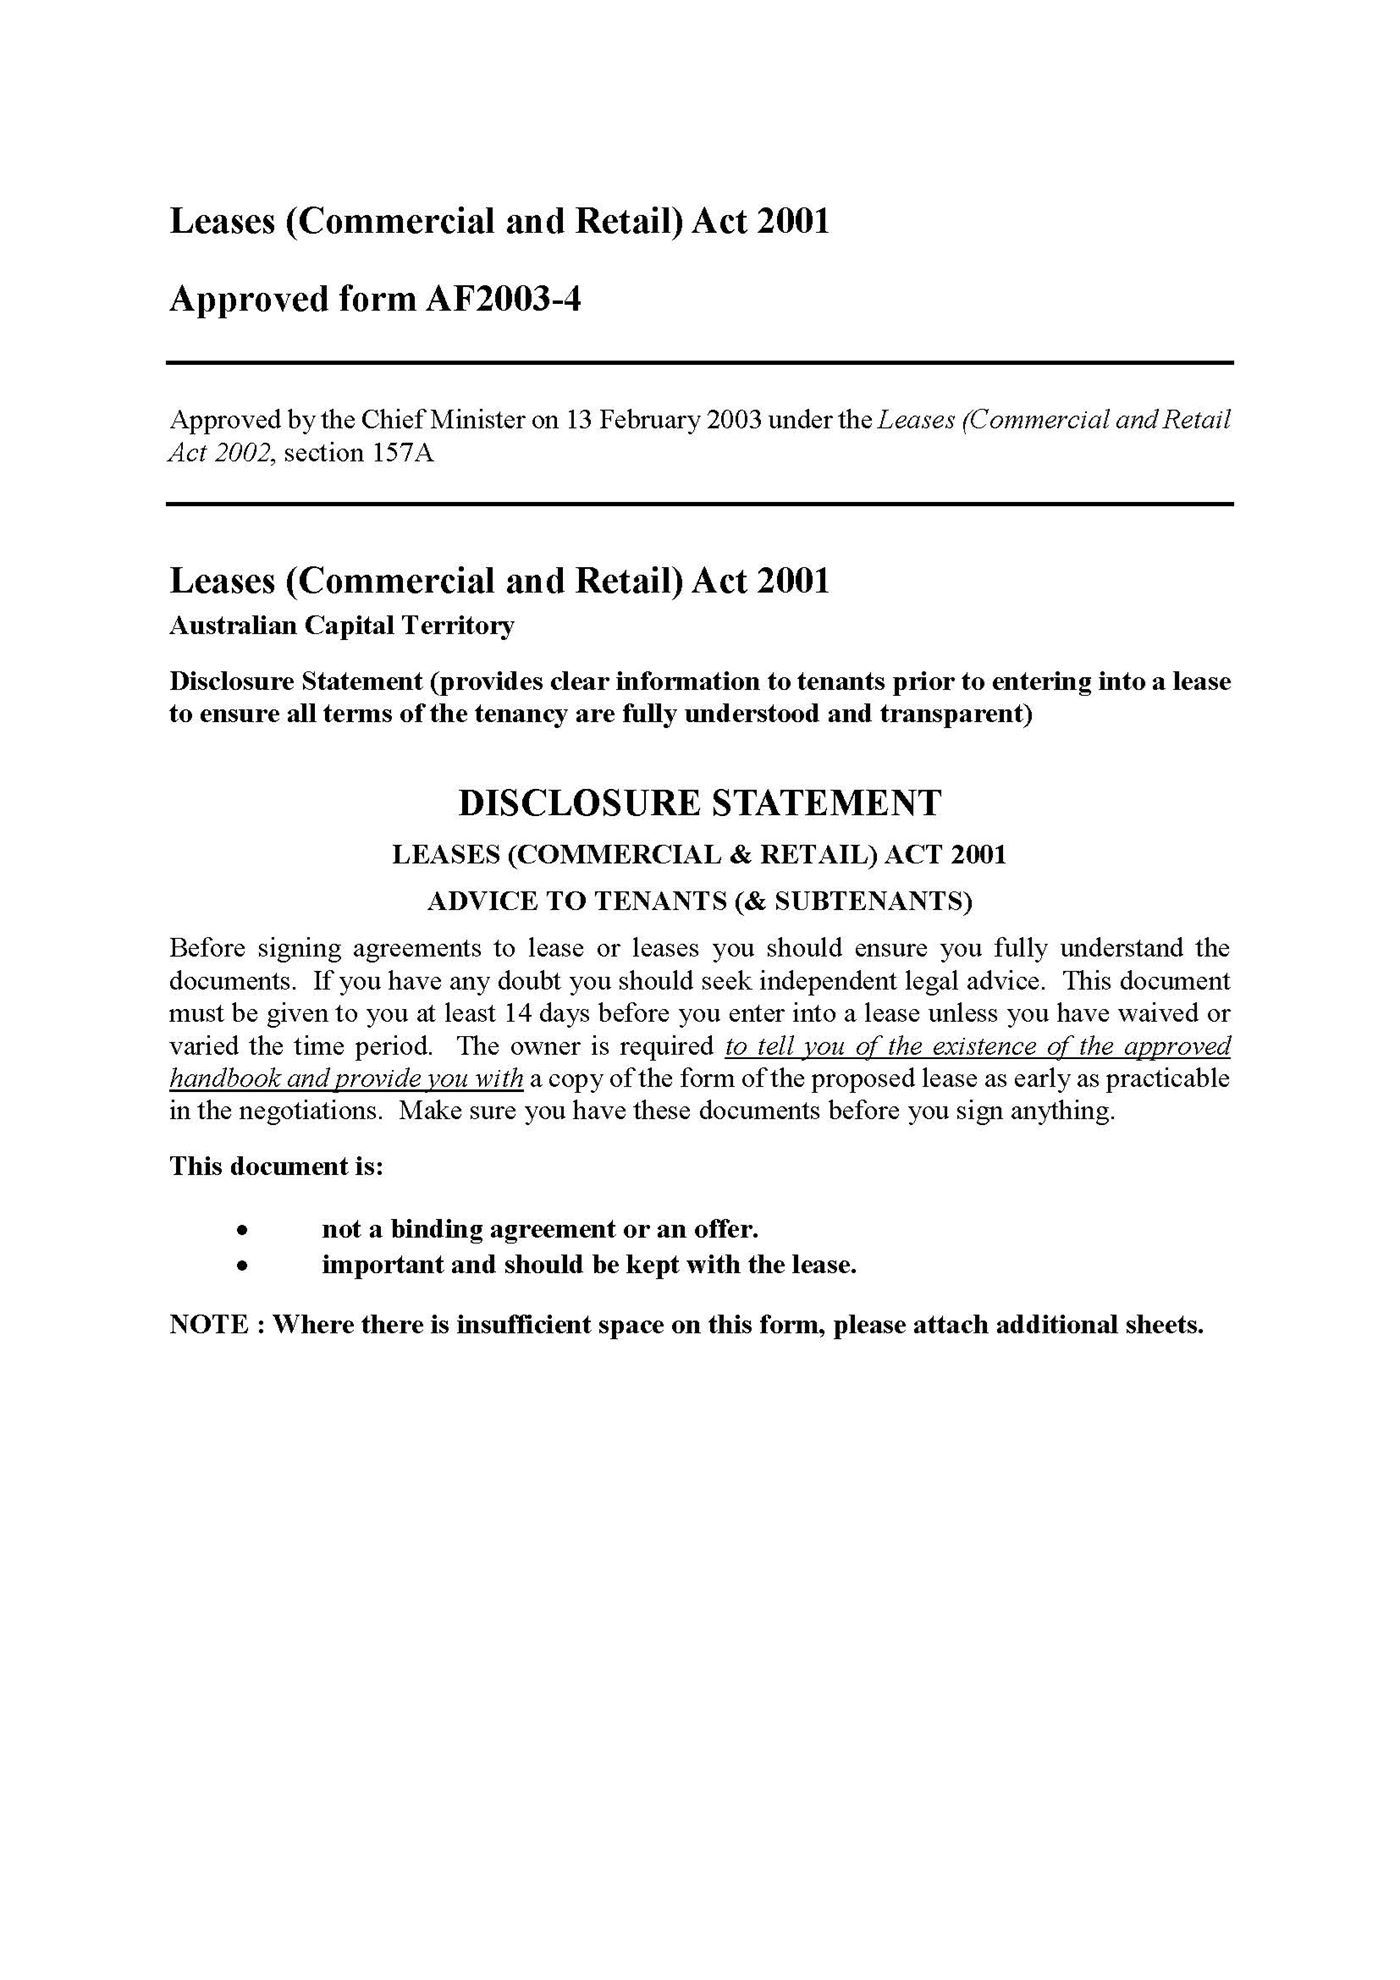 disclosure statement on assignment of lease